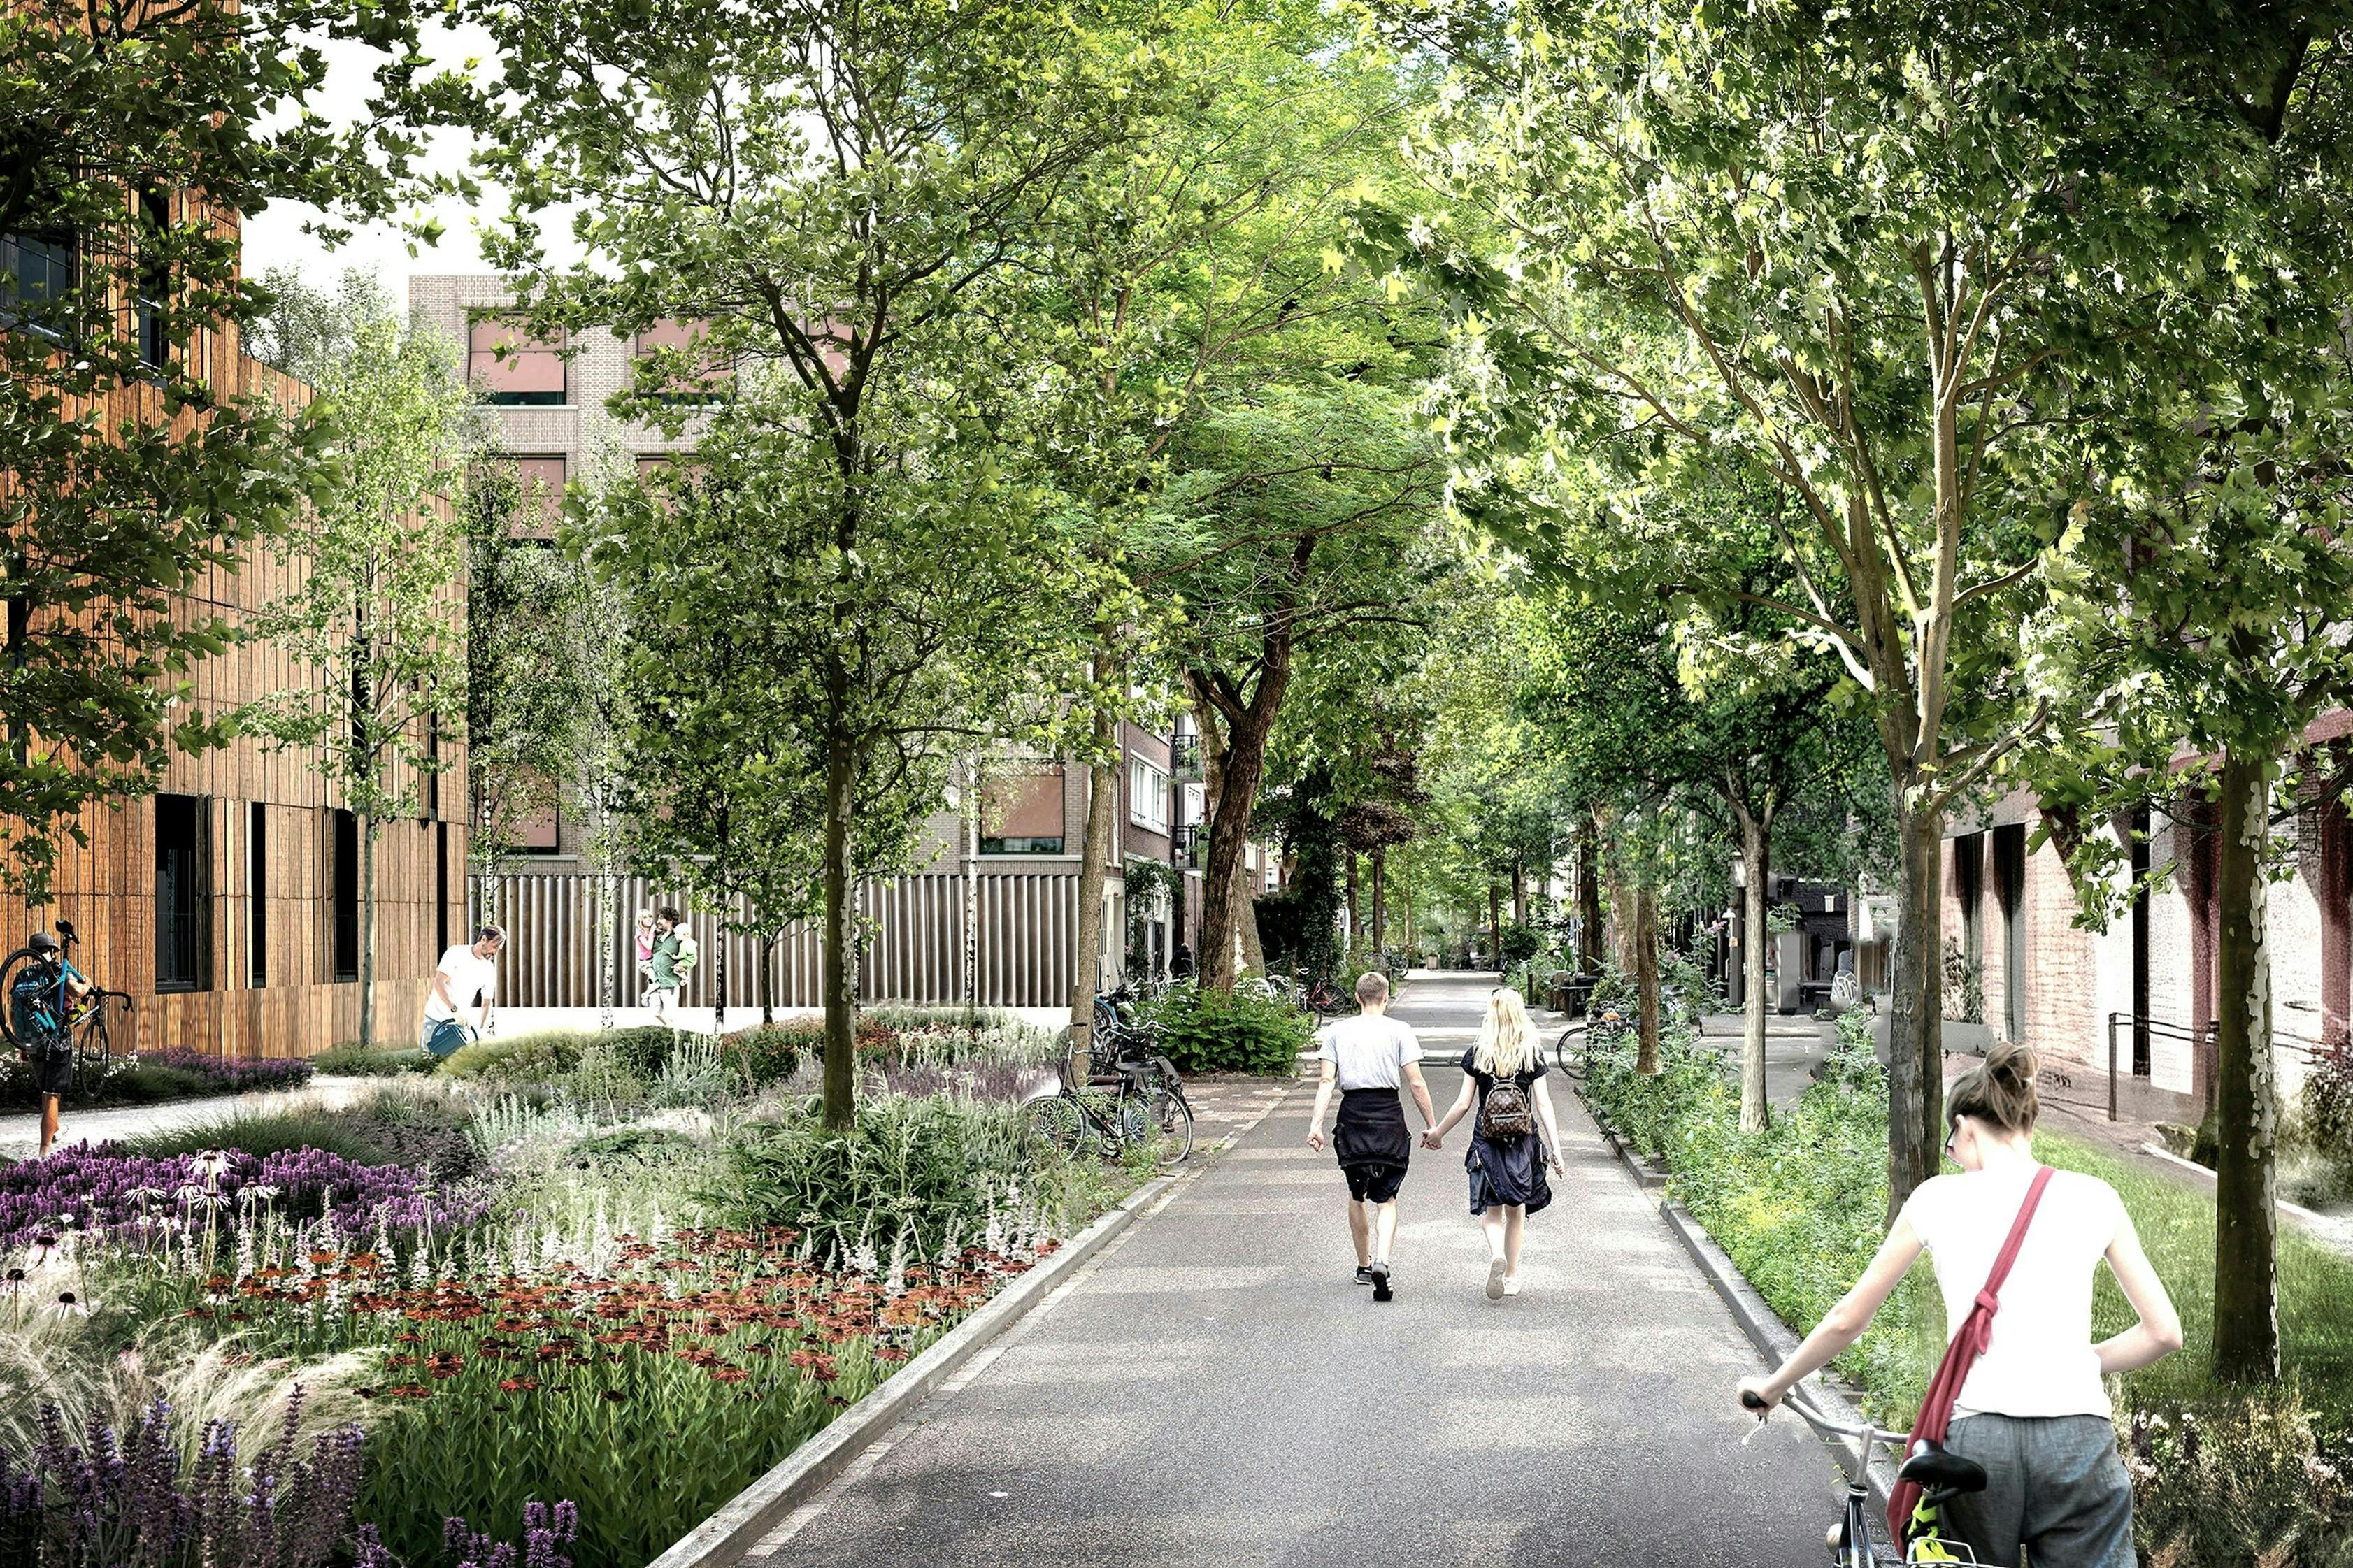 INTEGRATED GREEN STREETS